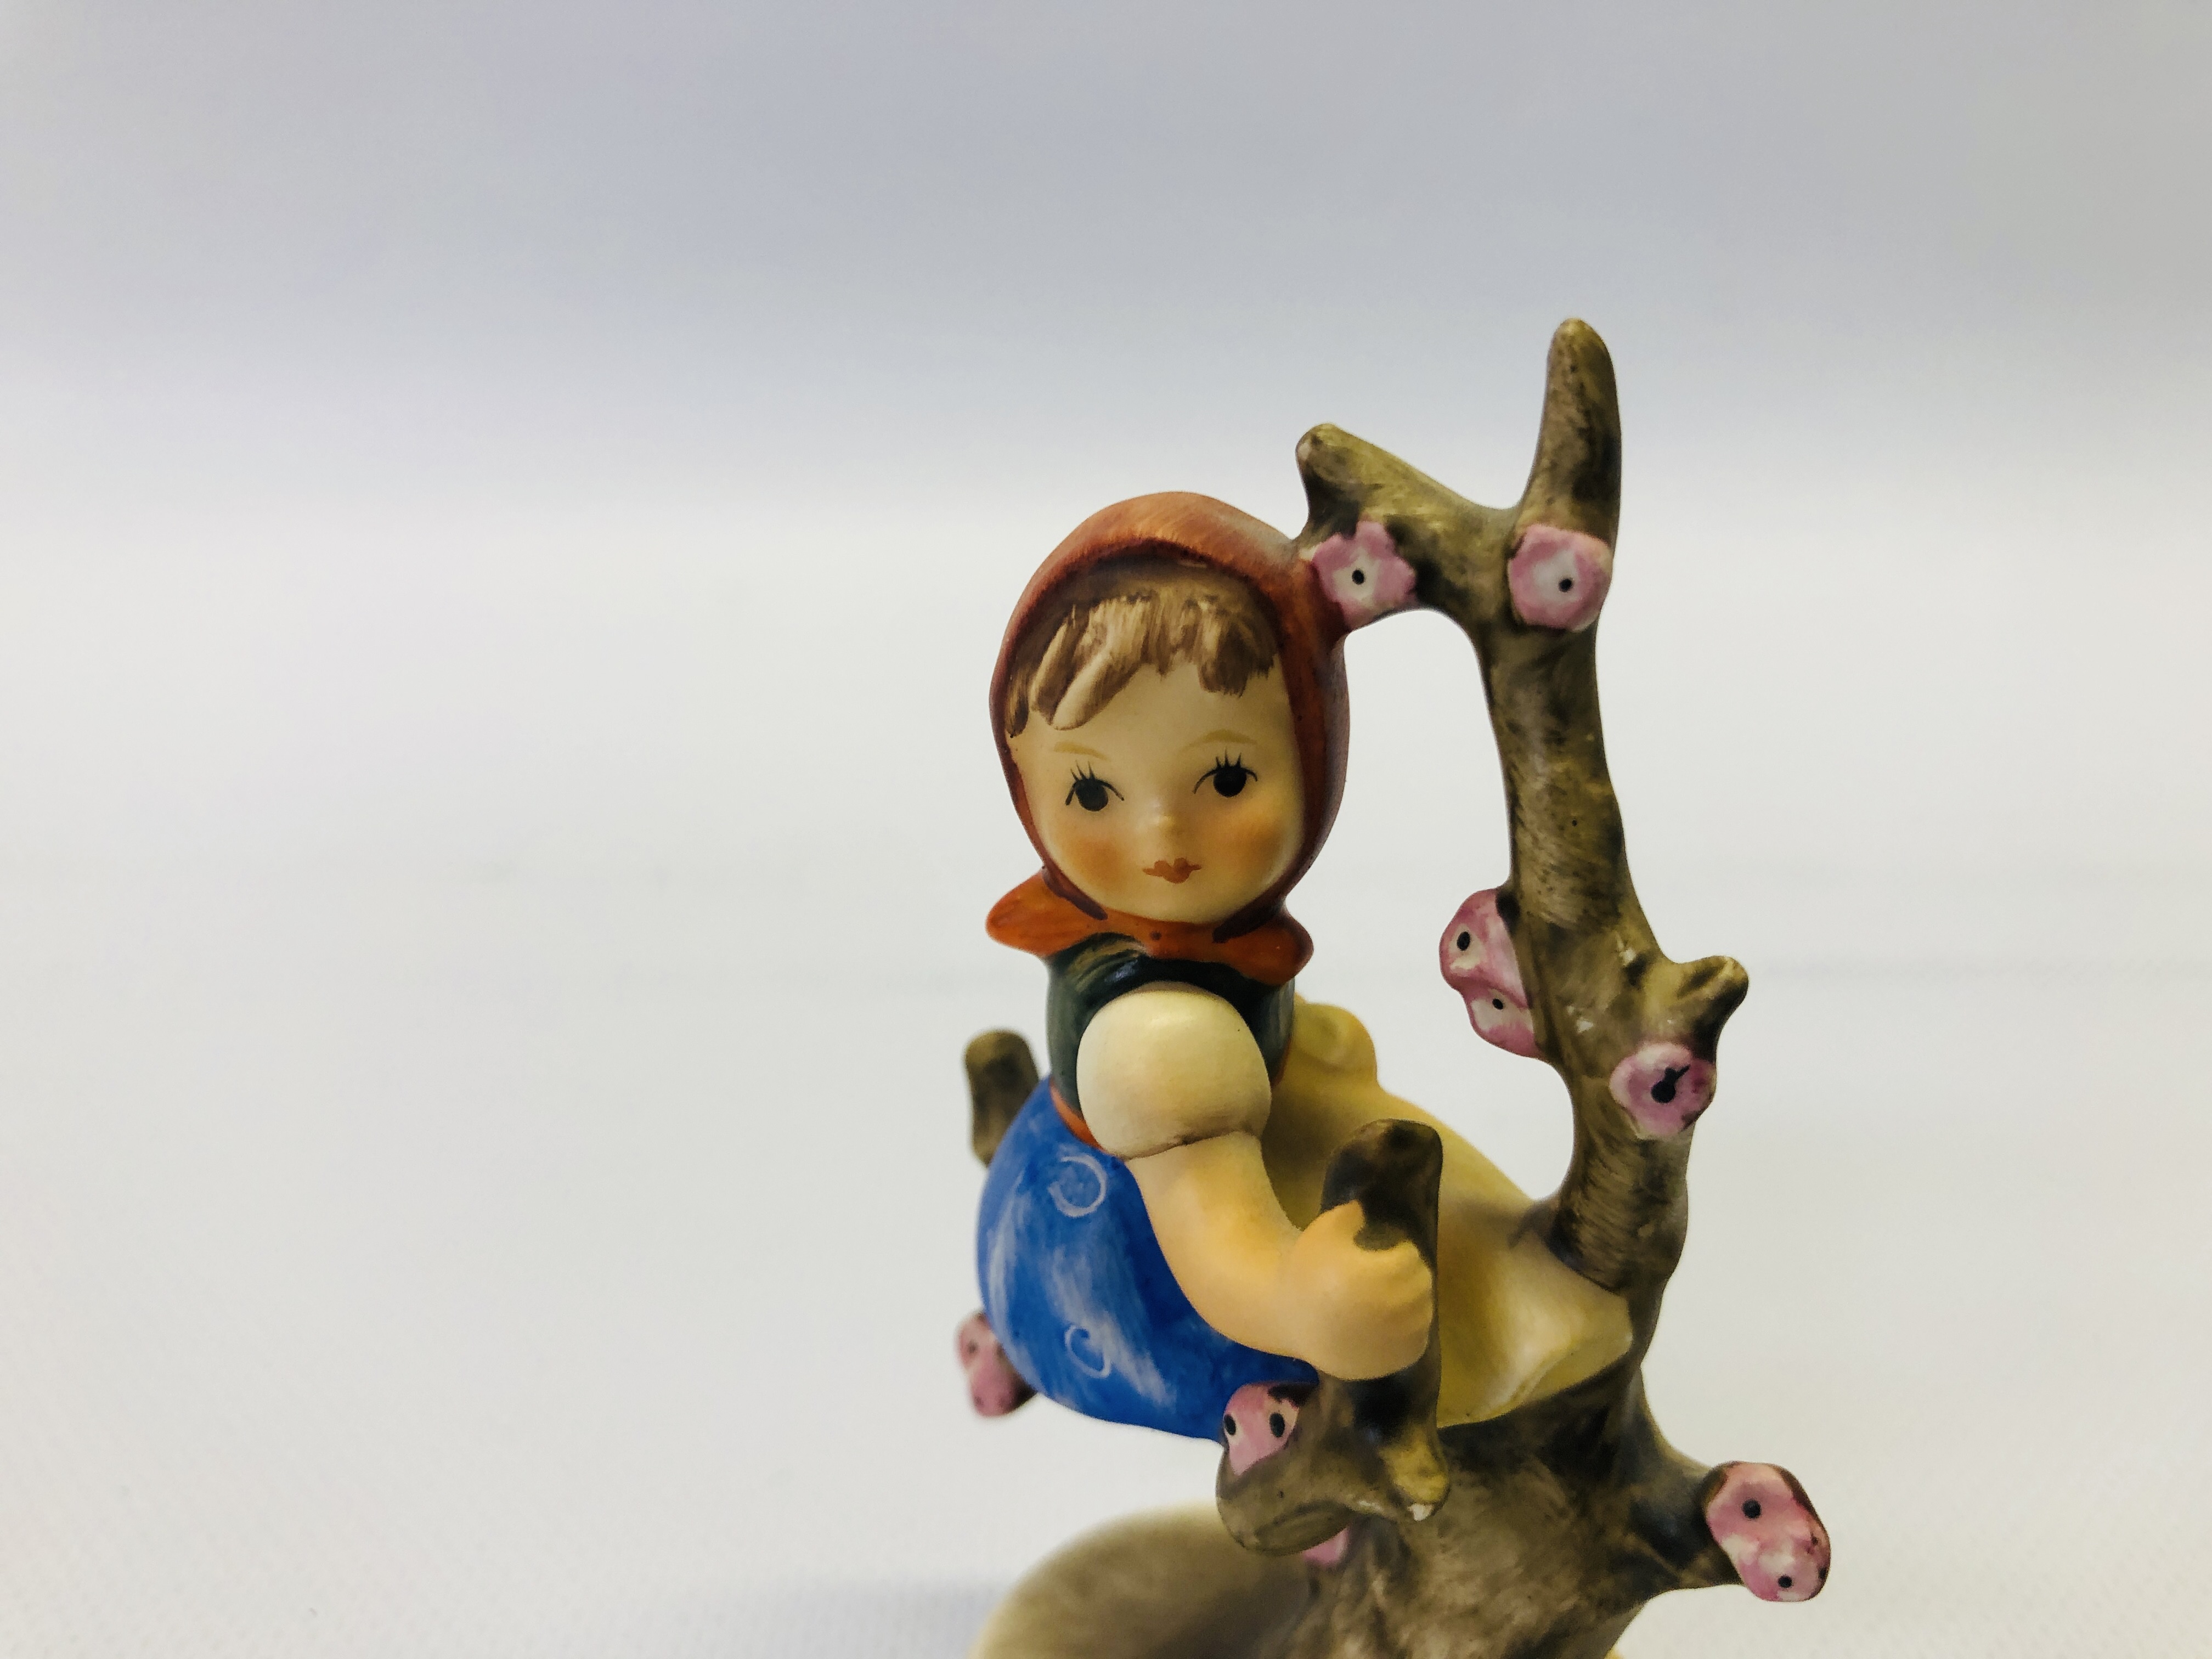 TWO "GOEBEL" CABINET ORNAMENTS TO INCLUDE A YOUNG GIRL SEATED IN A BLOSSOM TREE AND A YOUNG BOY - Image 2 of 7